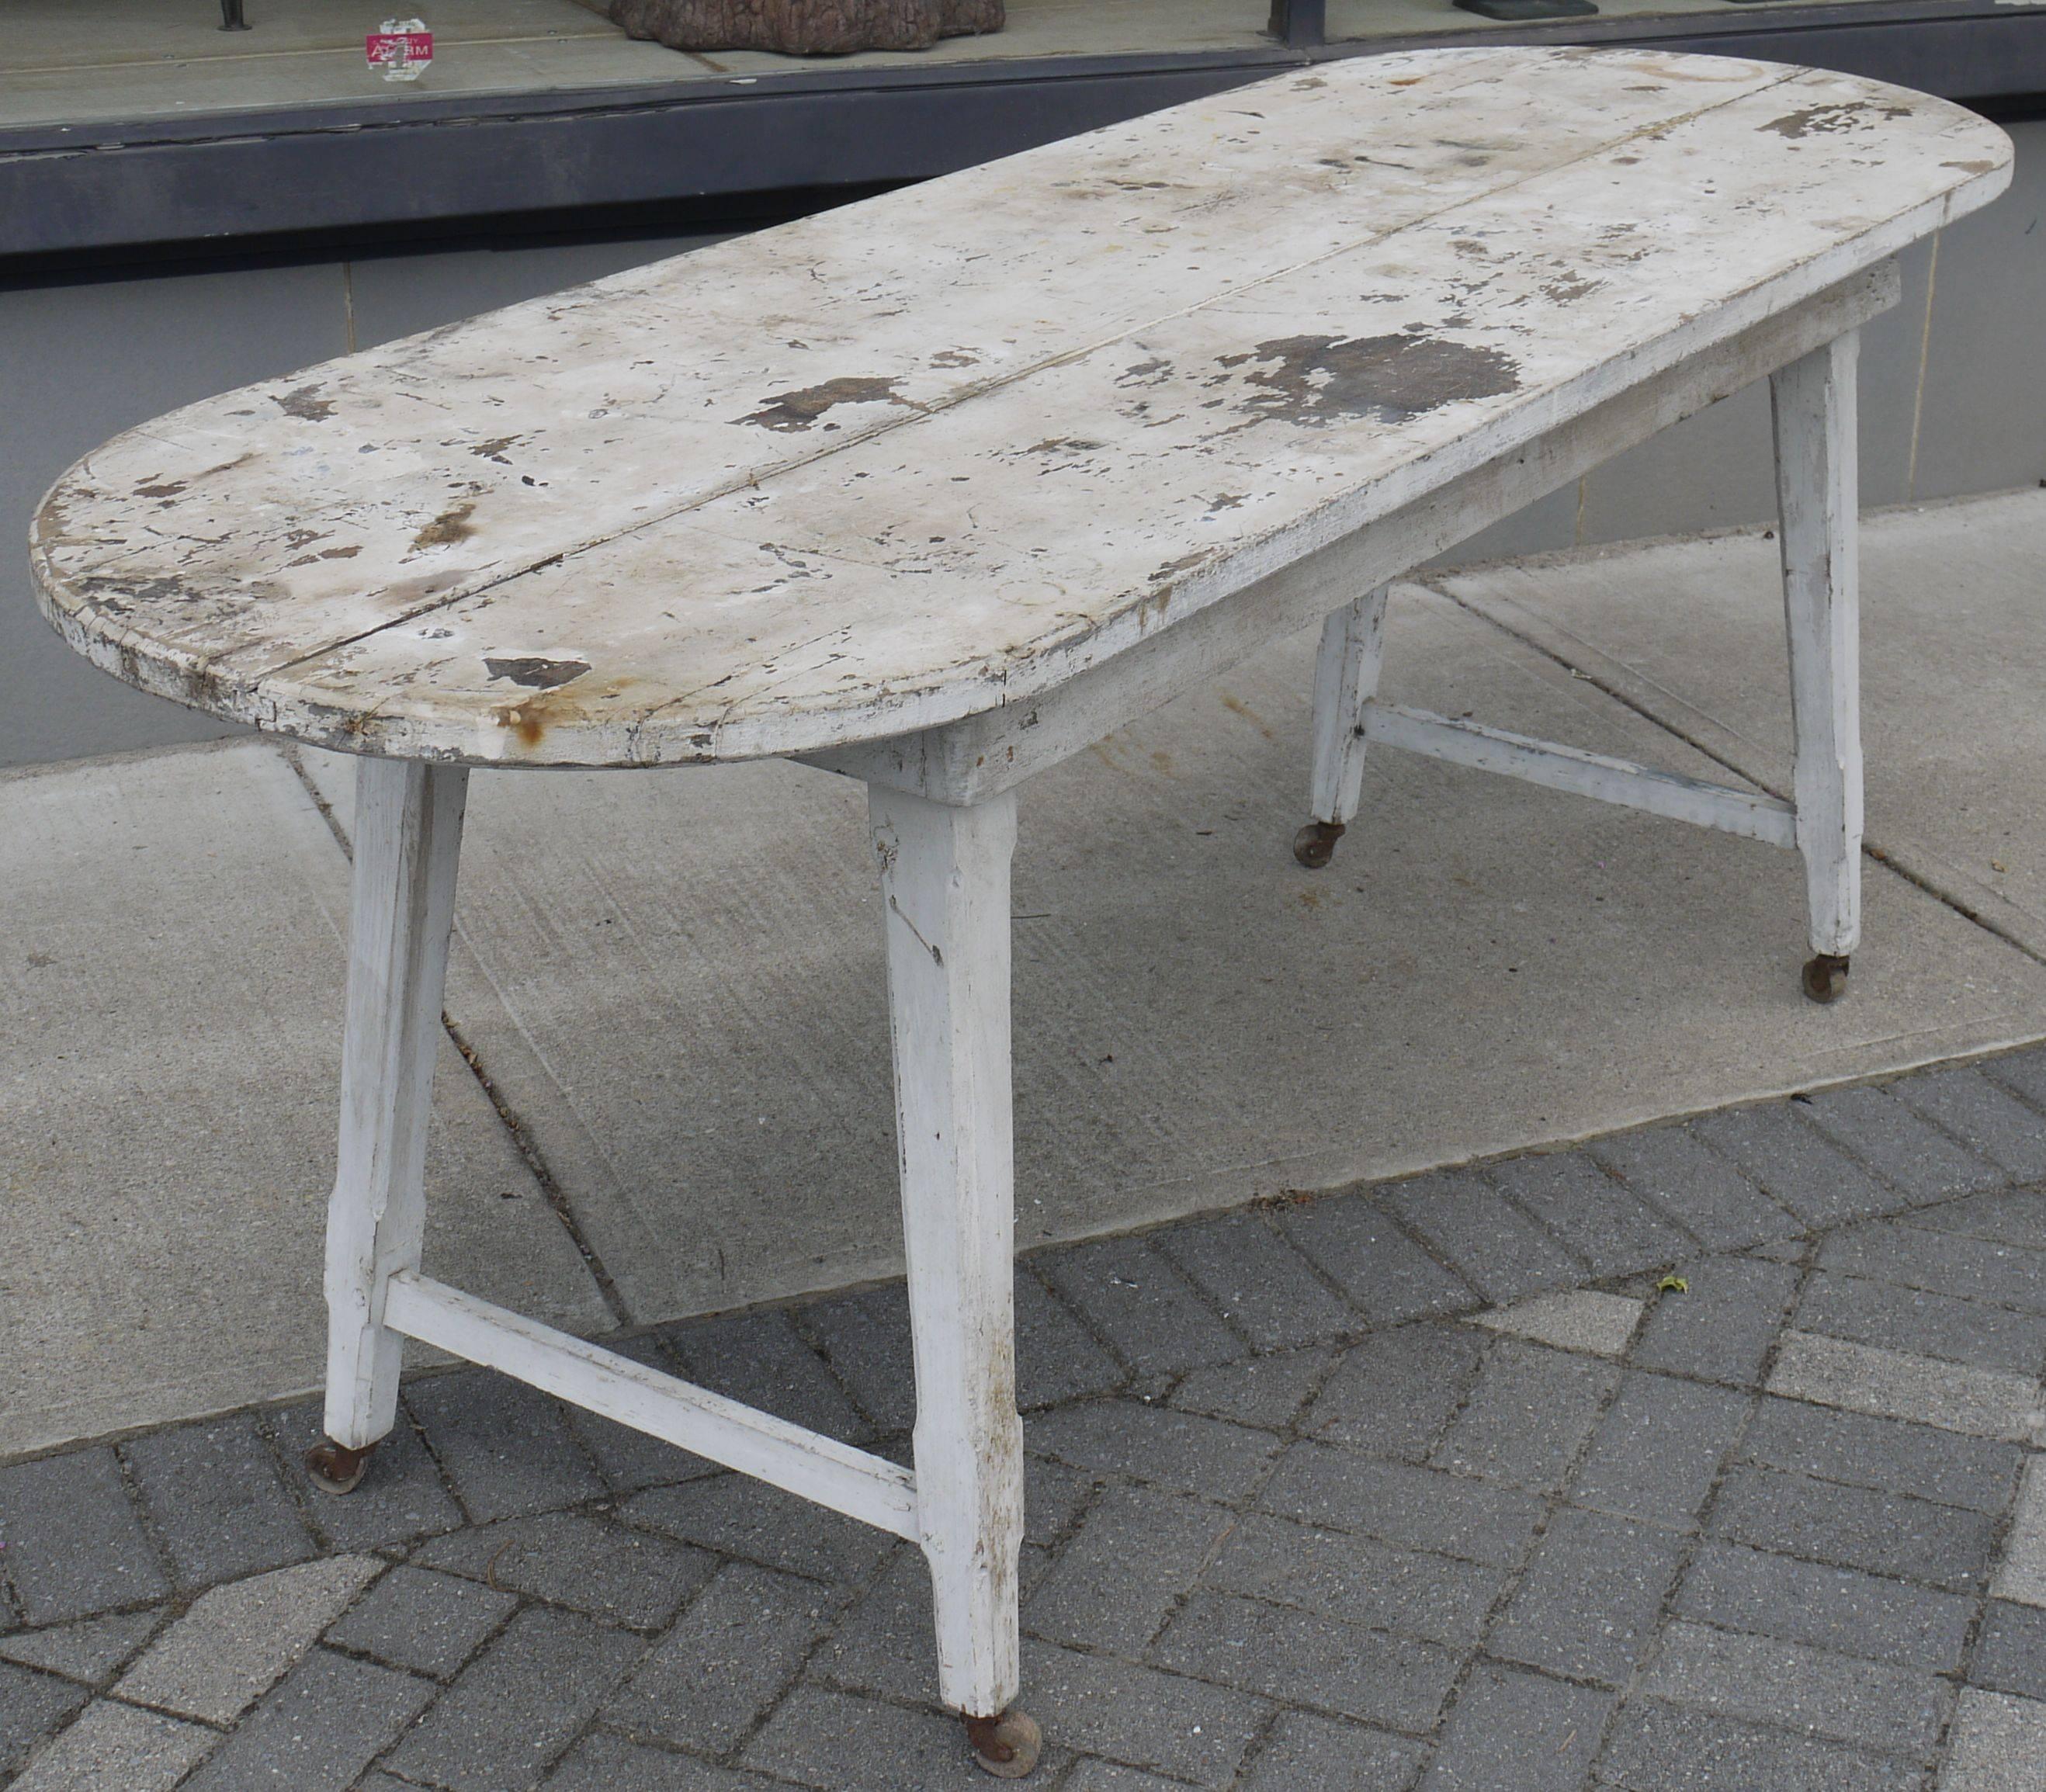 Awesome original paint farm table from a tomato canning factory in Ottoman Virginia which is from near the Chesapeake Bay. Great canted legs racetrack shaped top, peg construction on the bottom part, with original wooden wheels. Be great as a